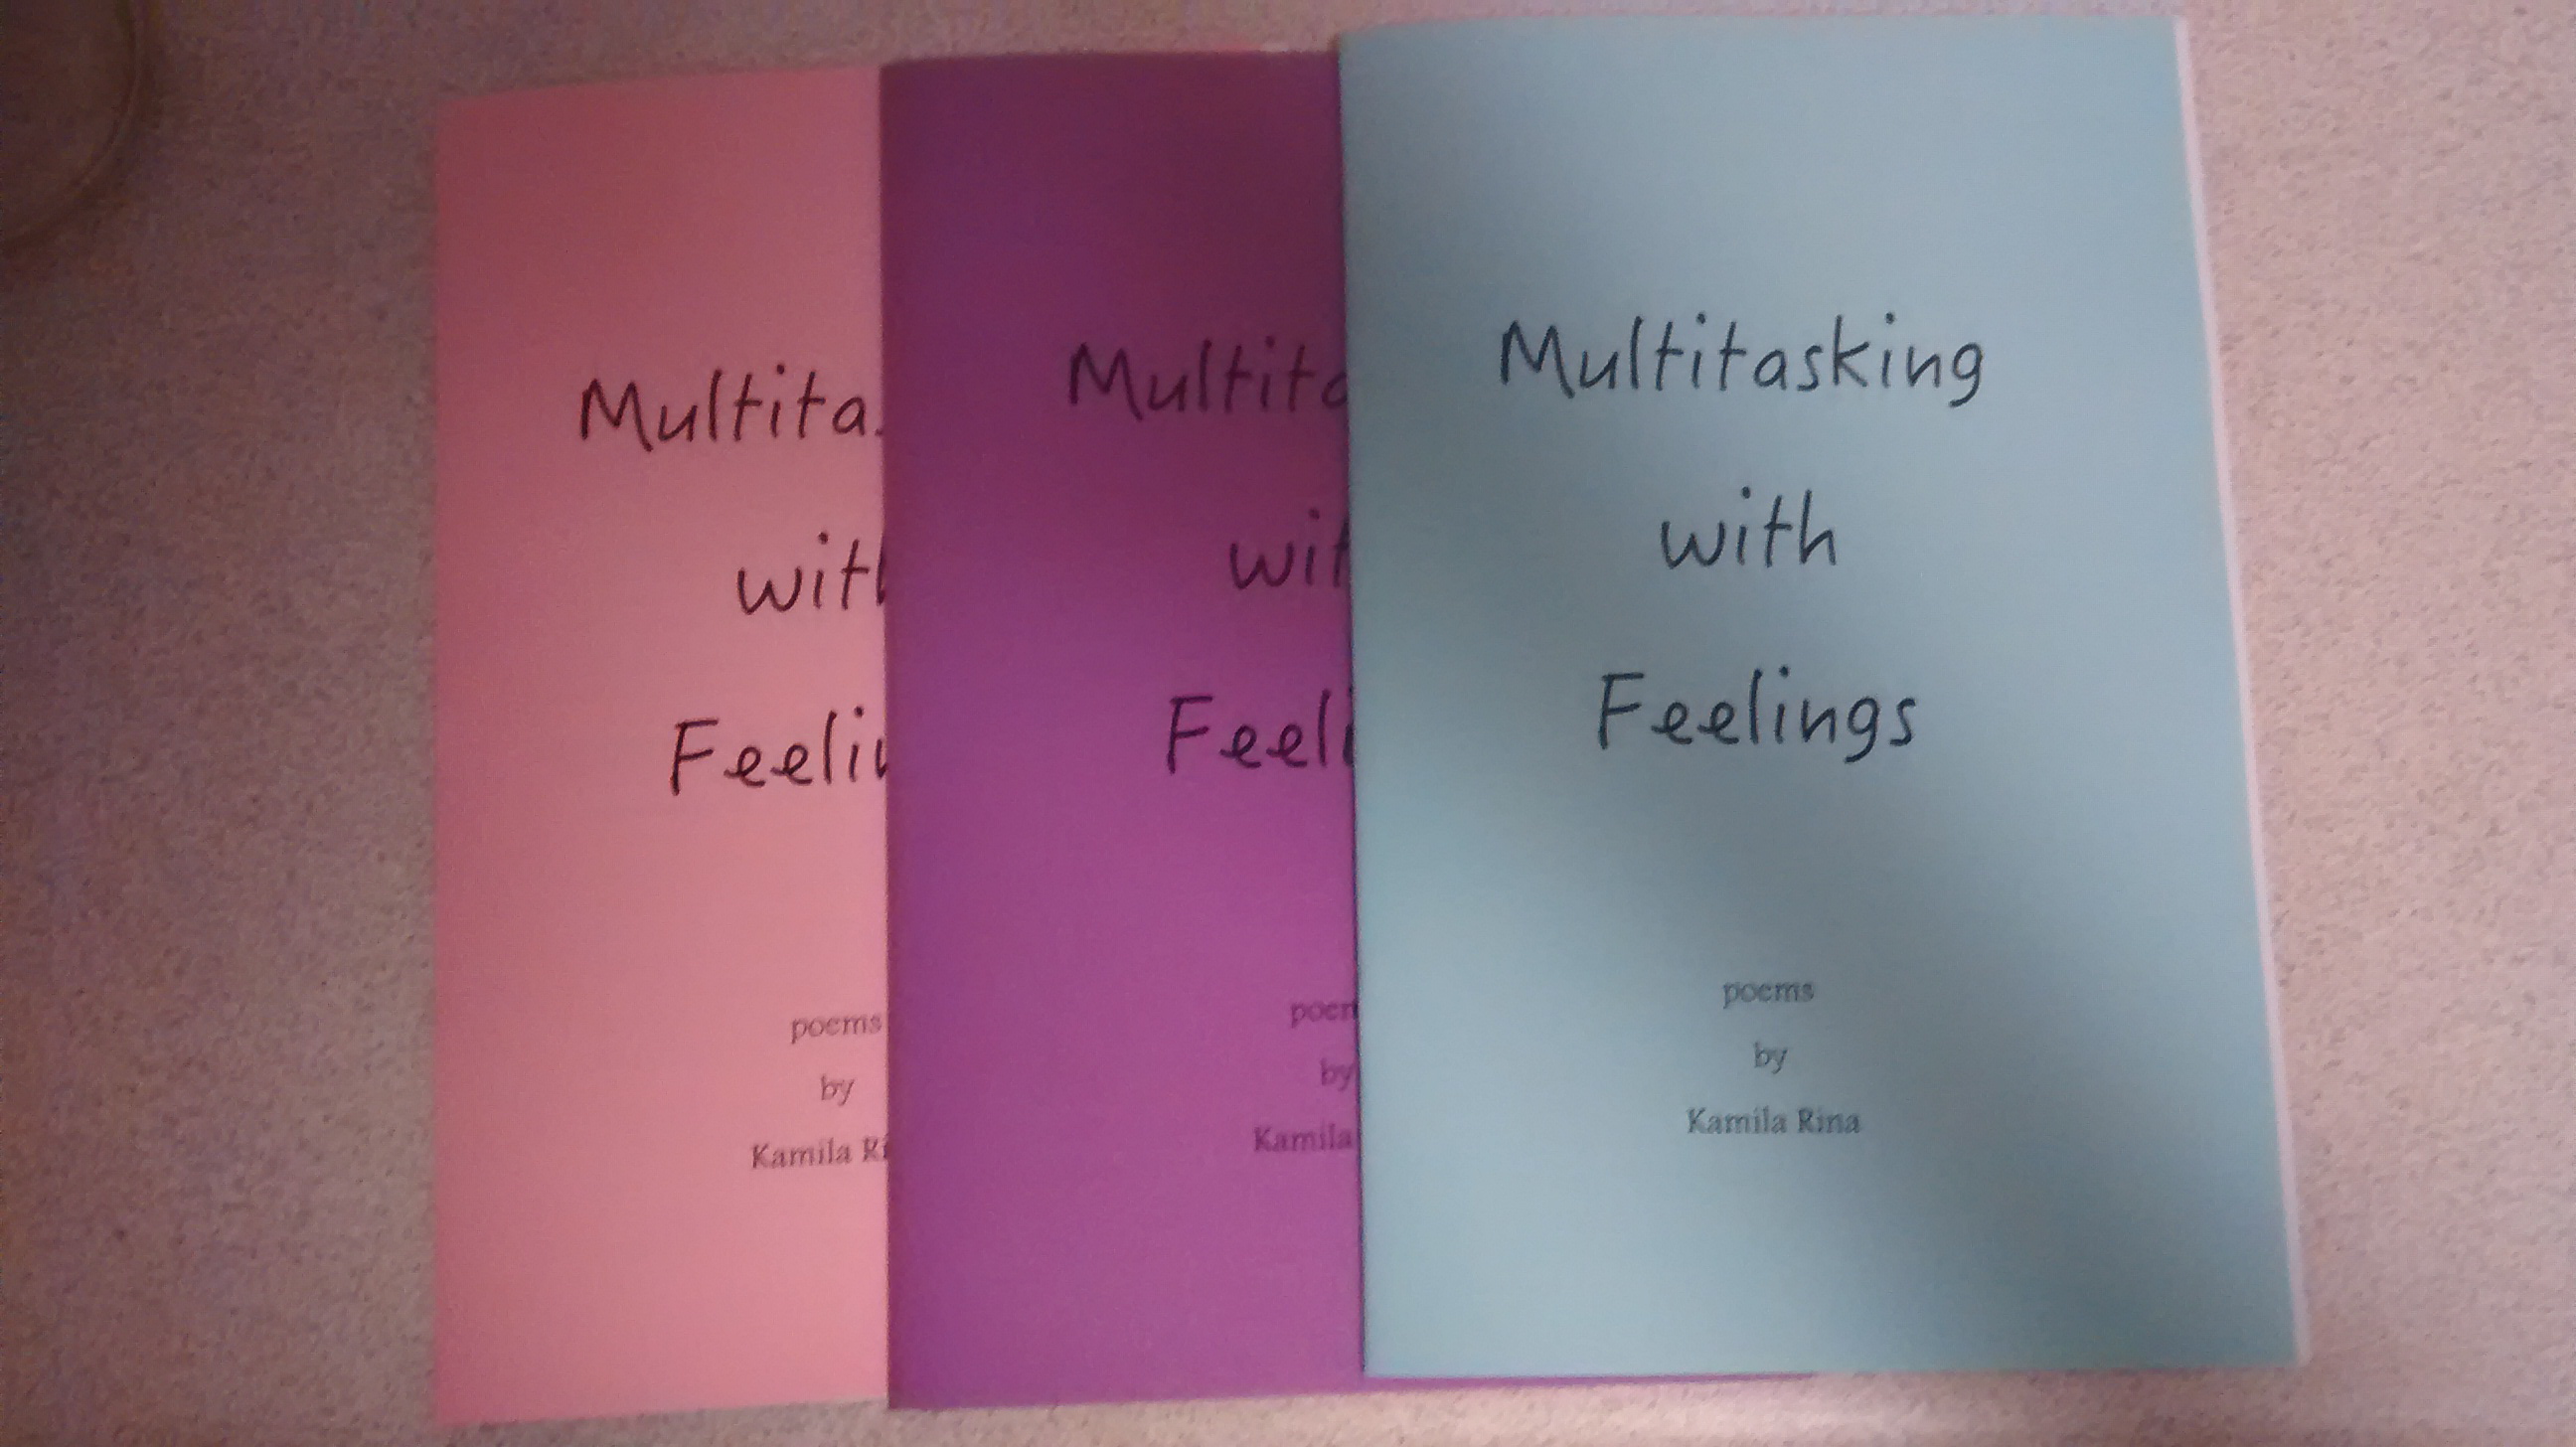 3 poetry chapbooks in pink, purple, and blue. All are titled "Multitasking with Feelings".